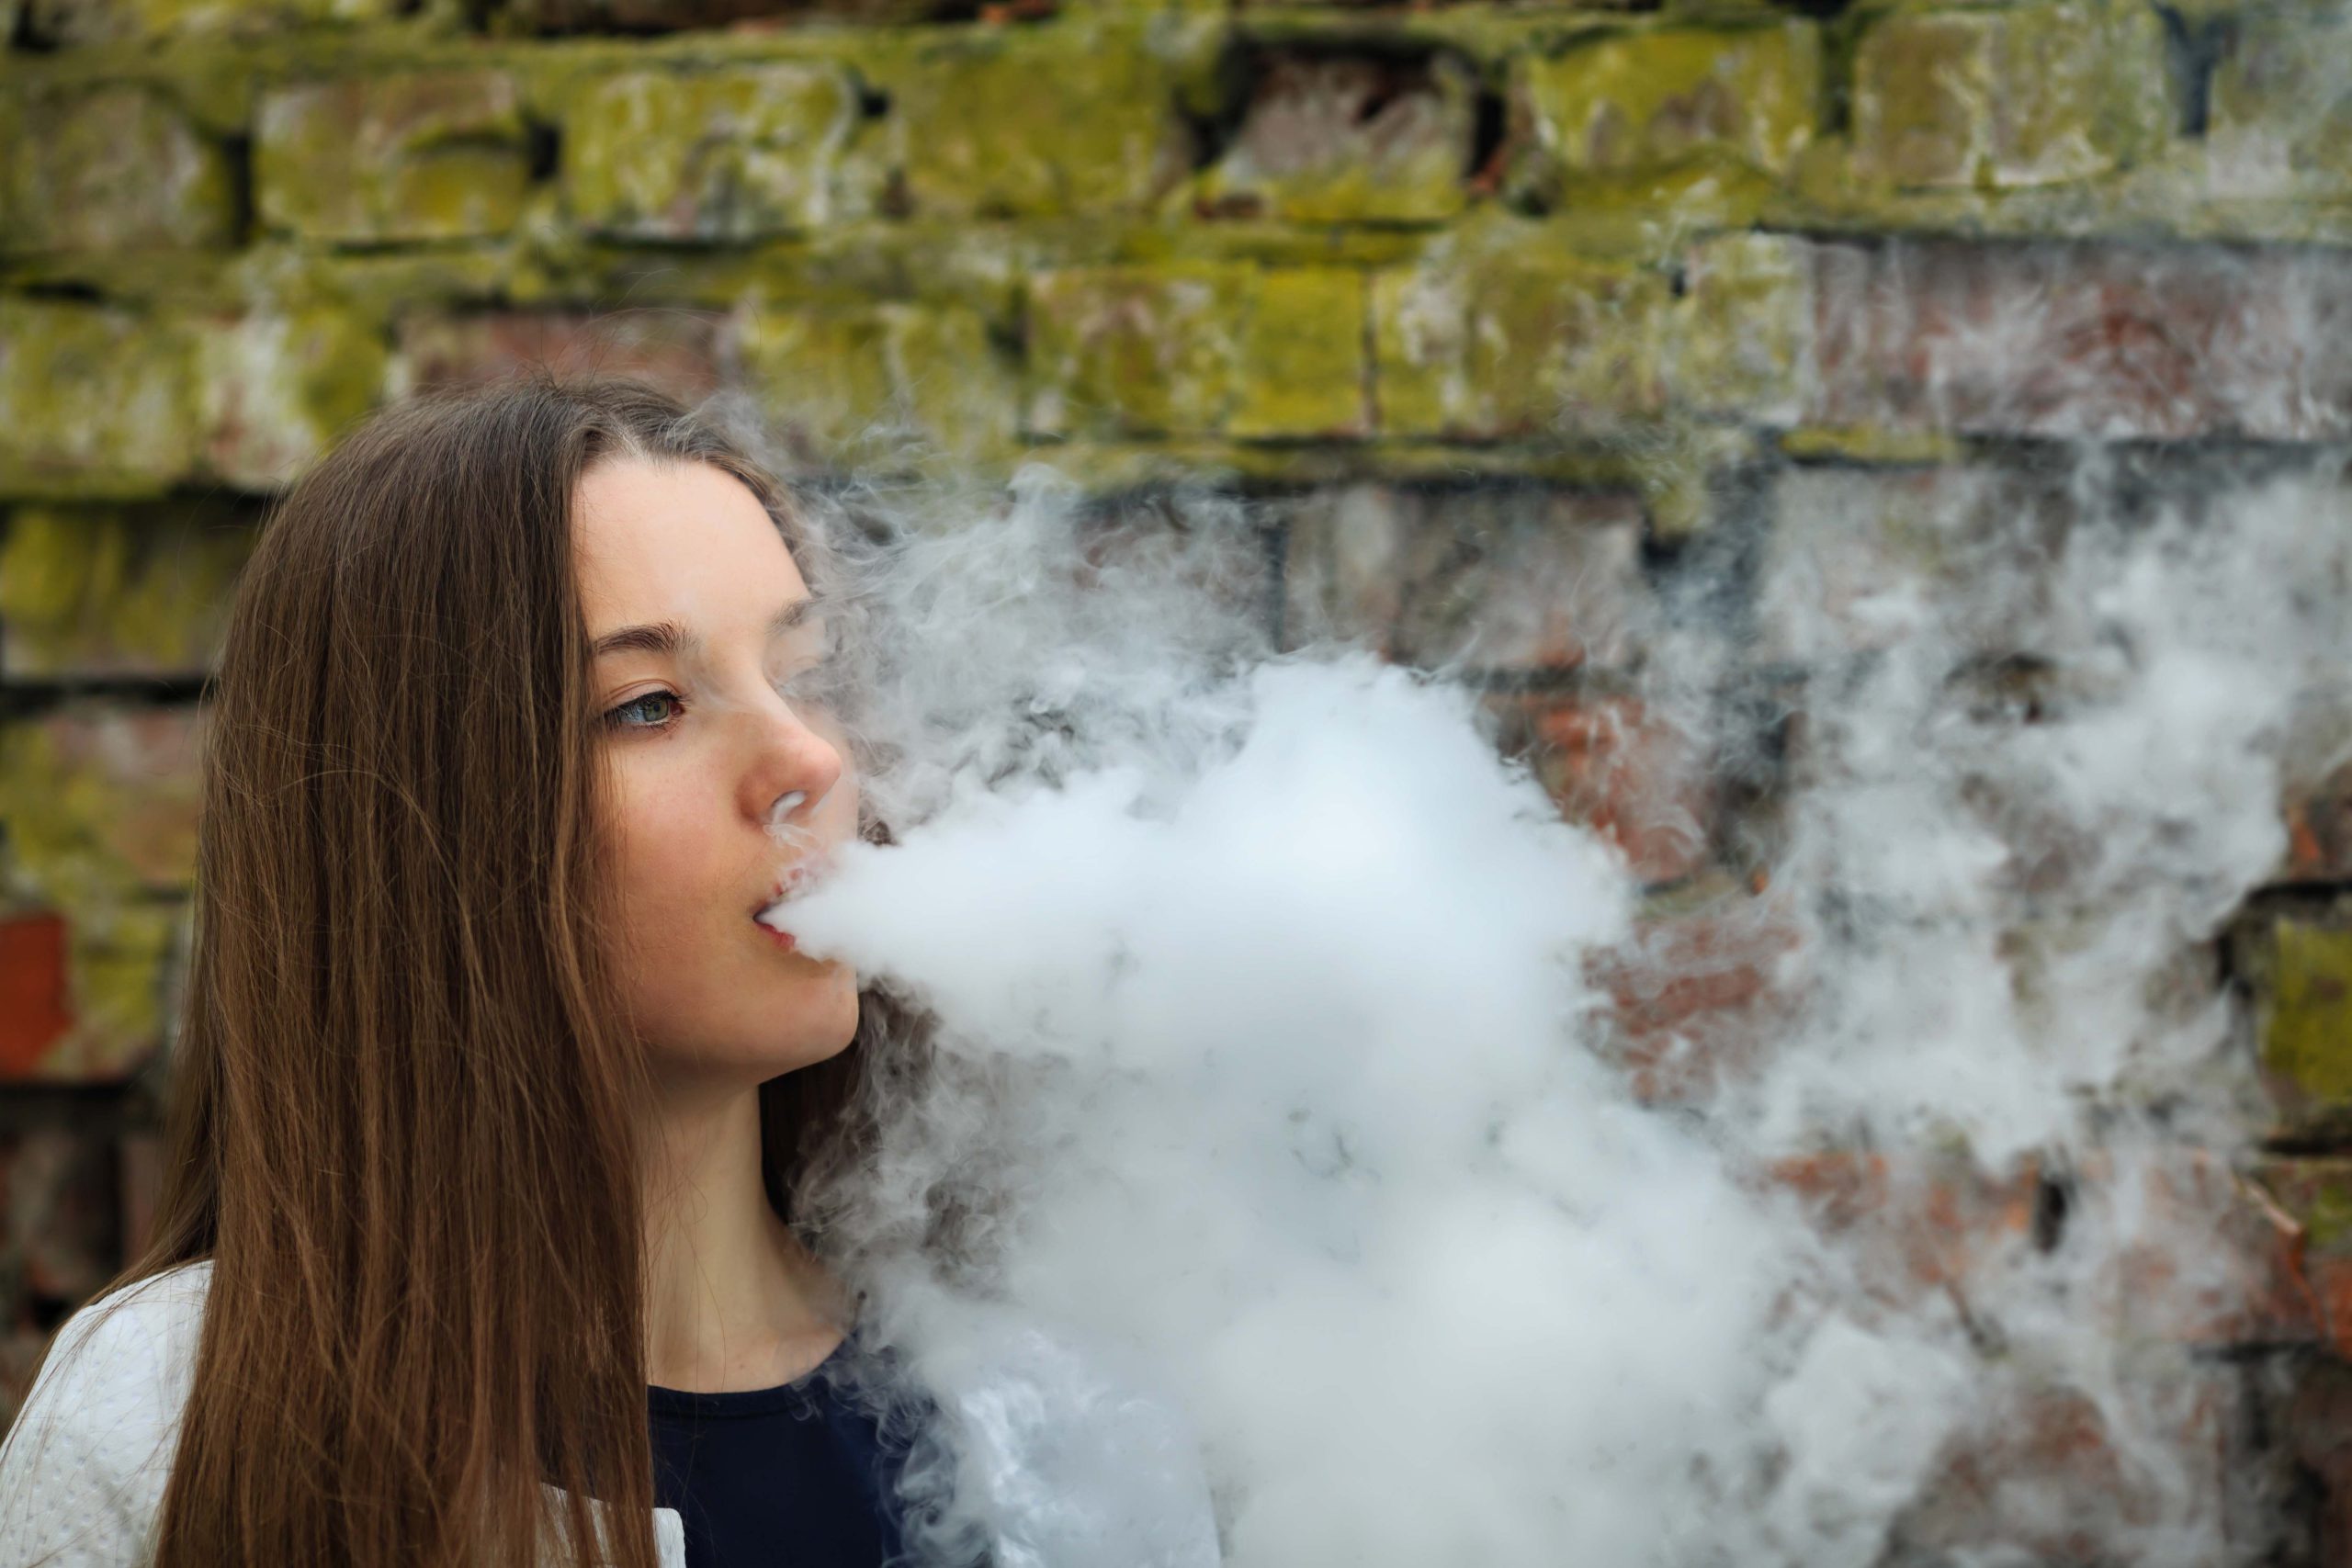 Vaping and teens: What parents need to know